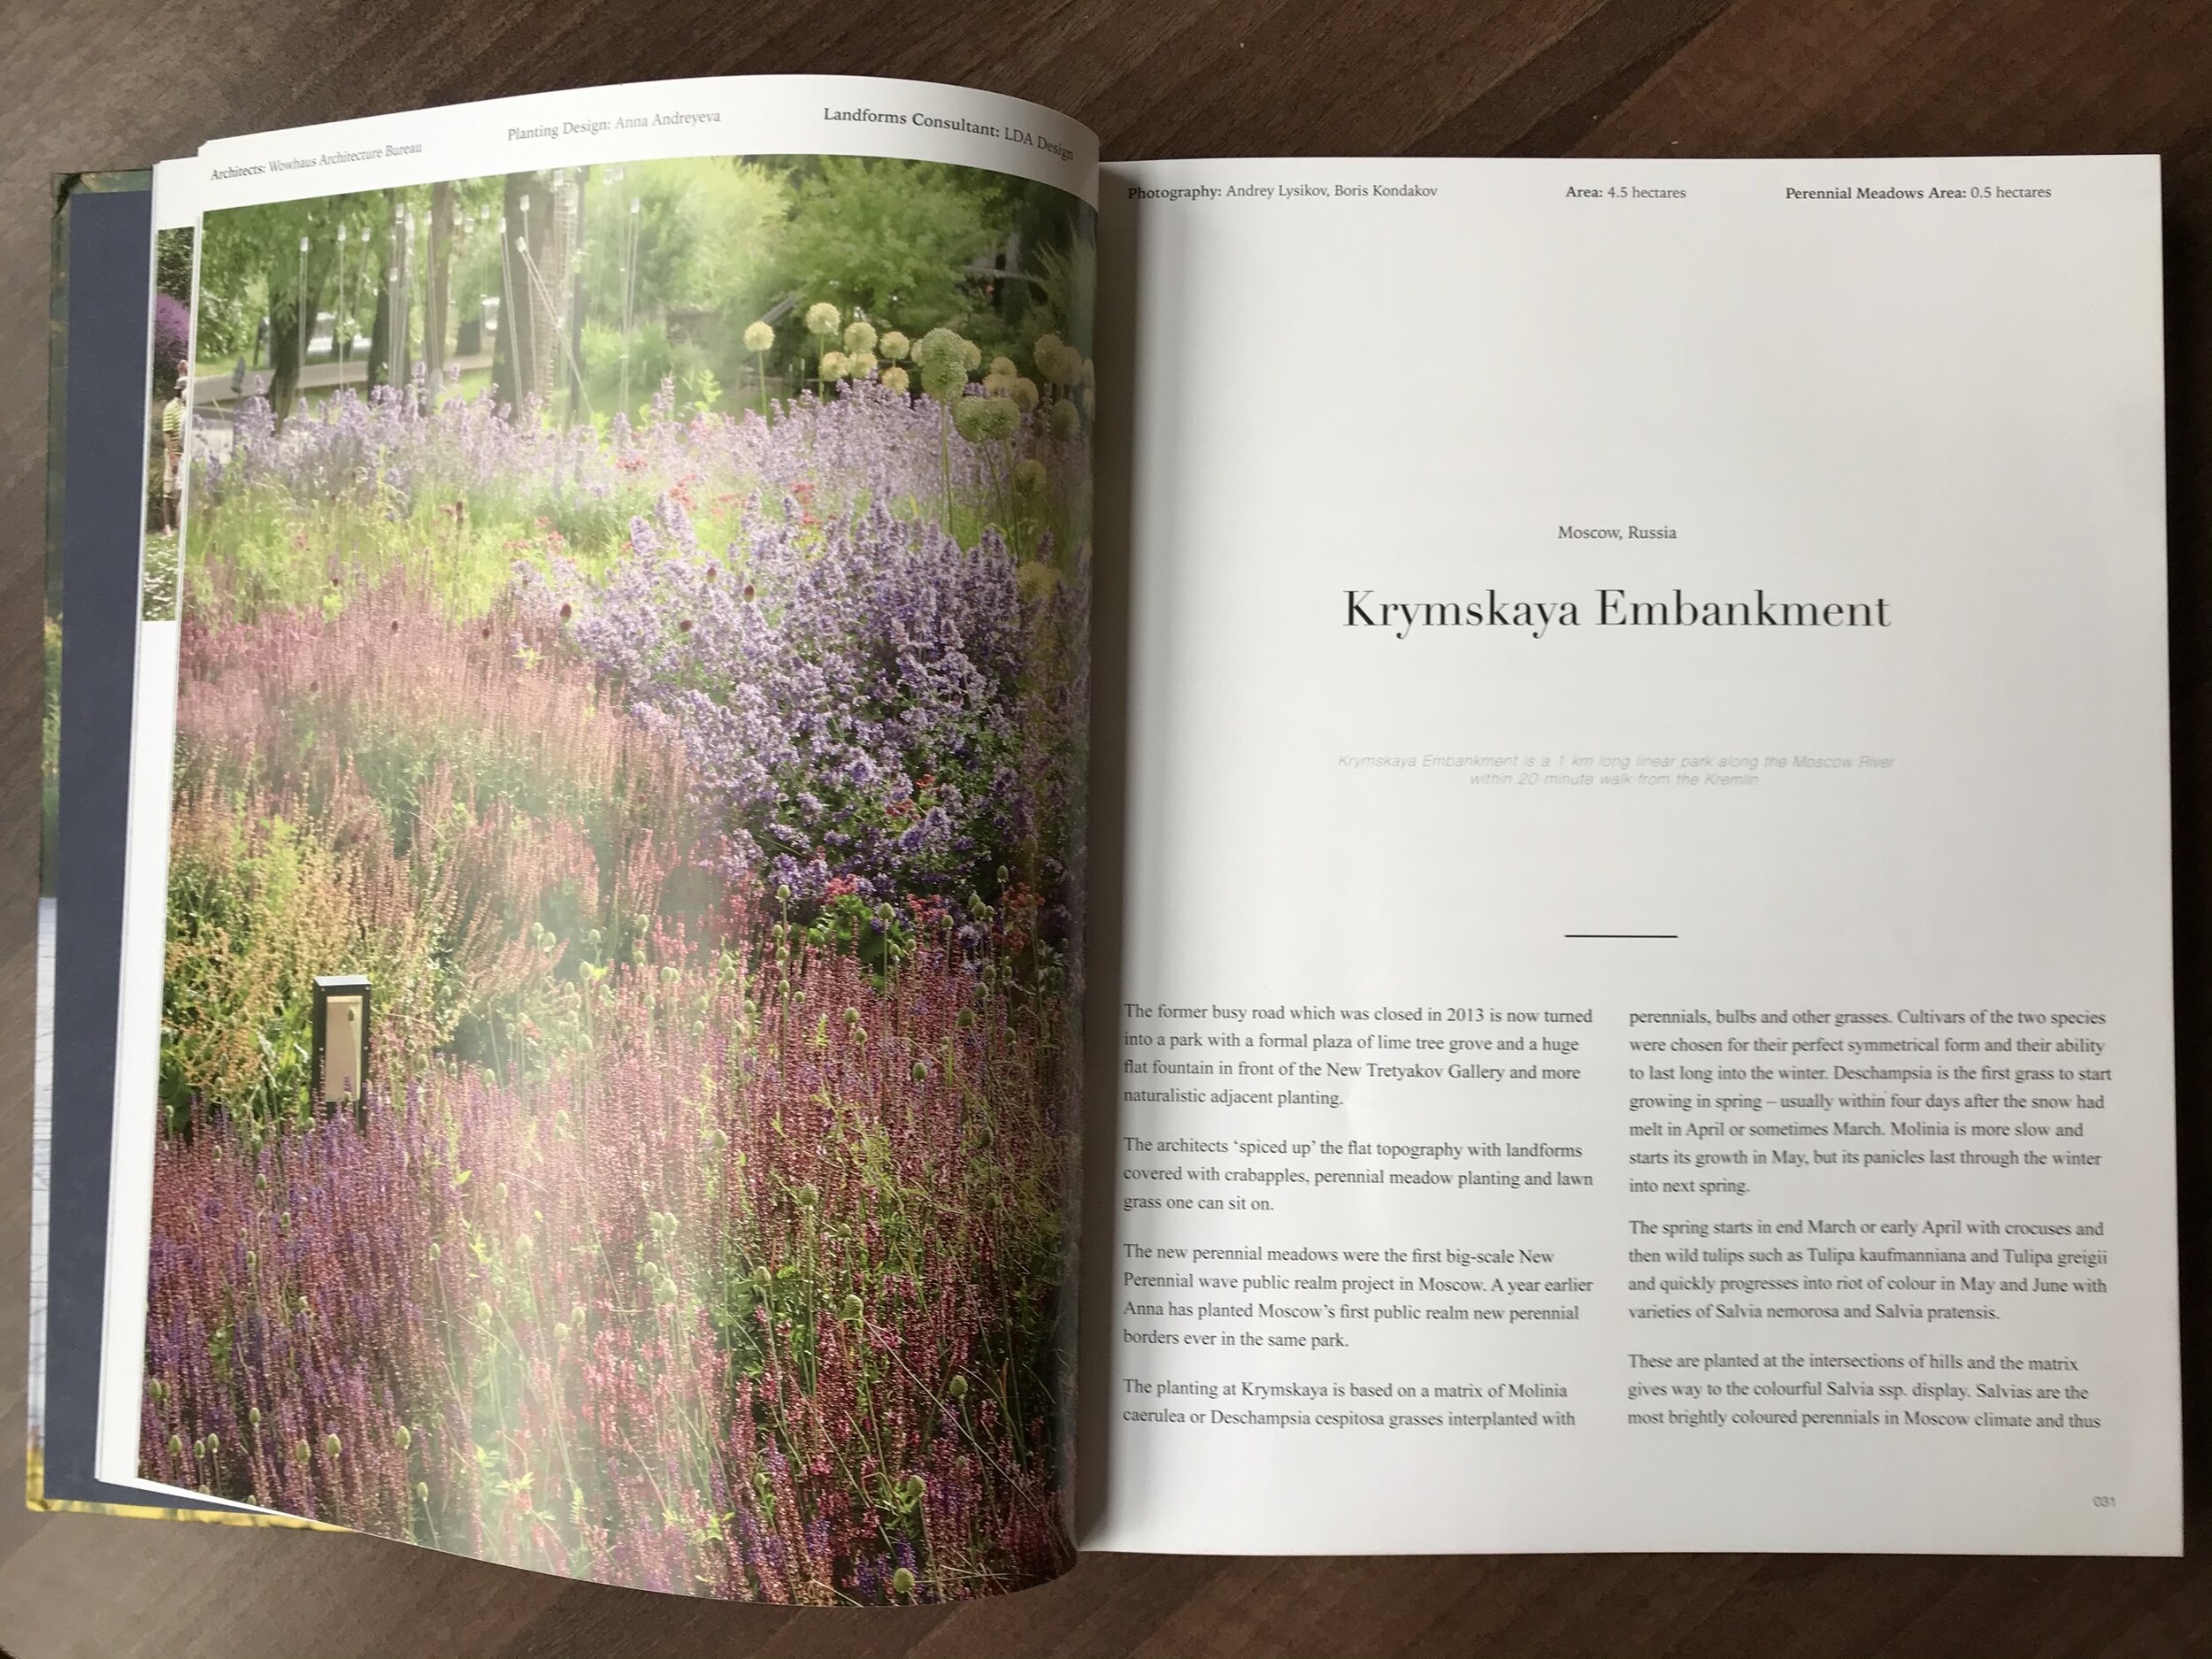  Plants are an important element in landscape architecture. The quality and effect of landscape are directly affected by planting design decisions. The book selects excellent landscape projects recently completed in which planting plays an important 